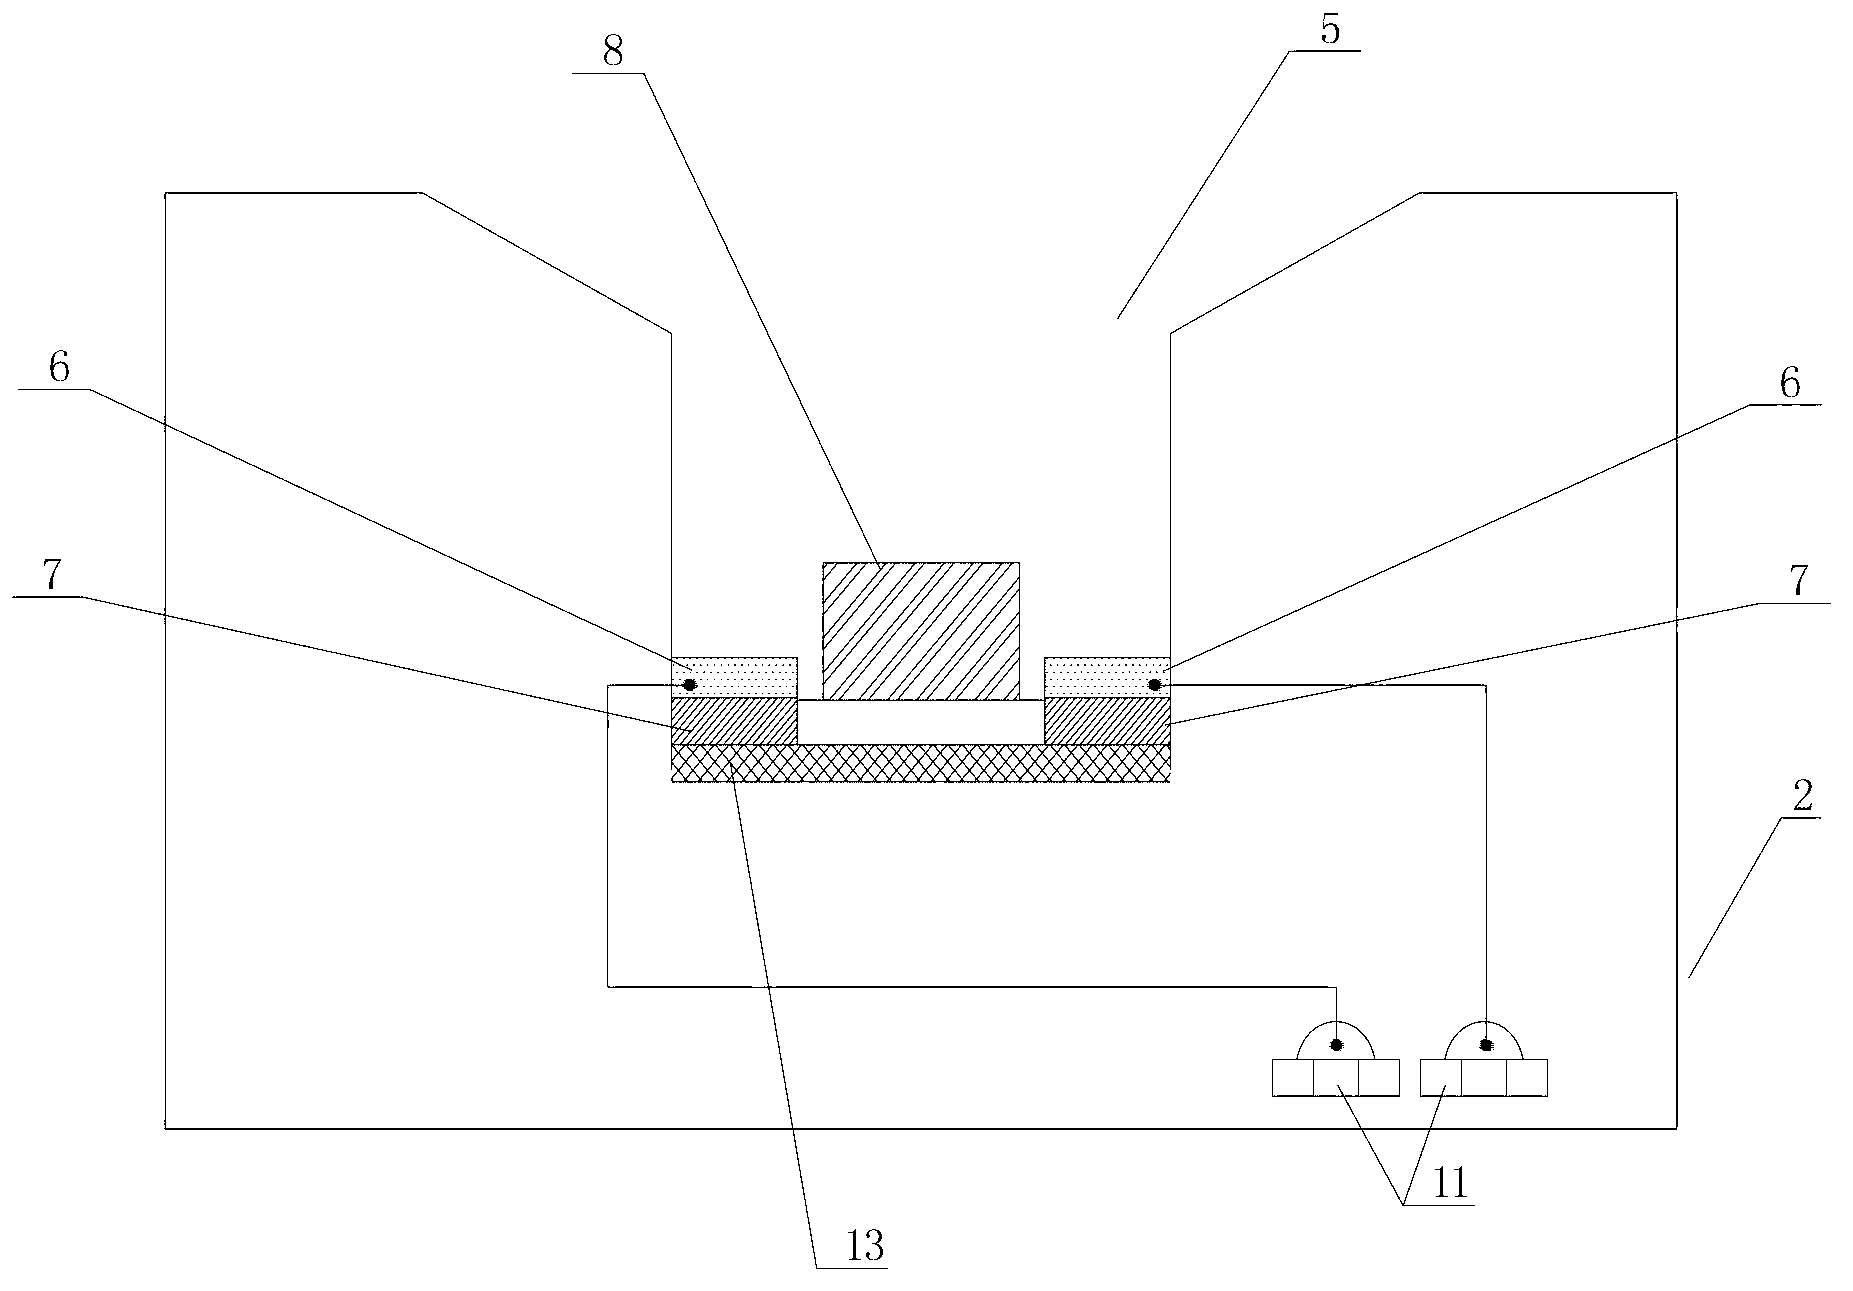 Automatically-registrated plug and socket